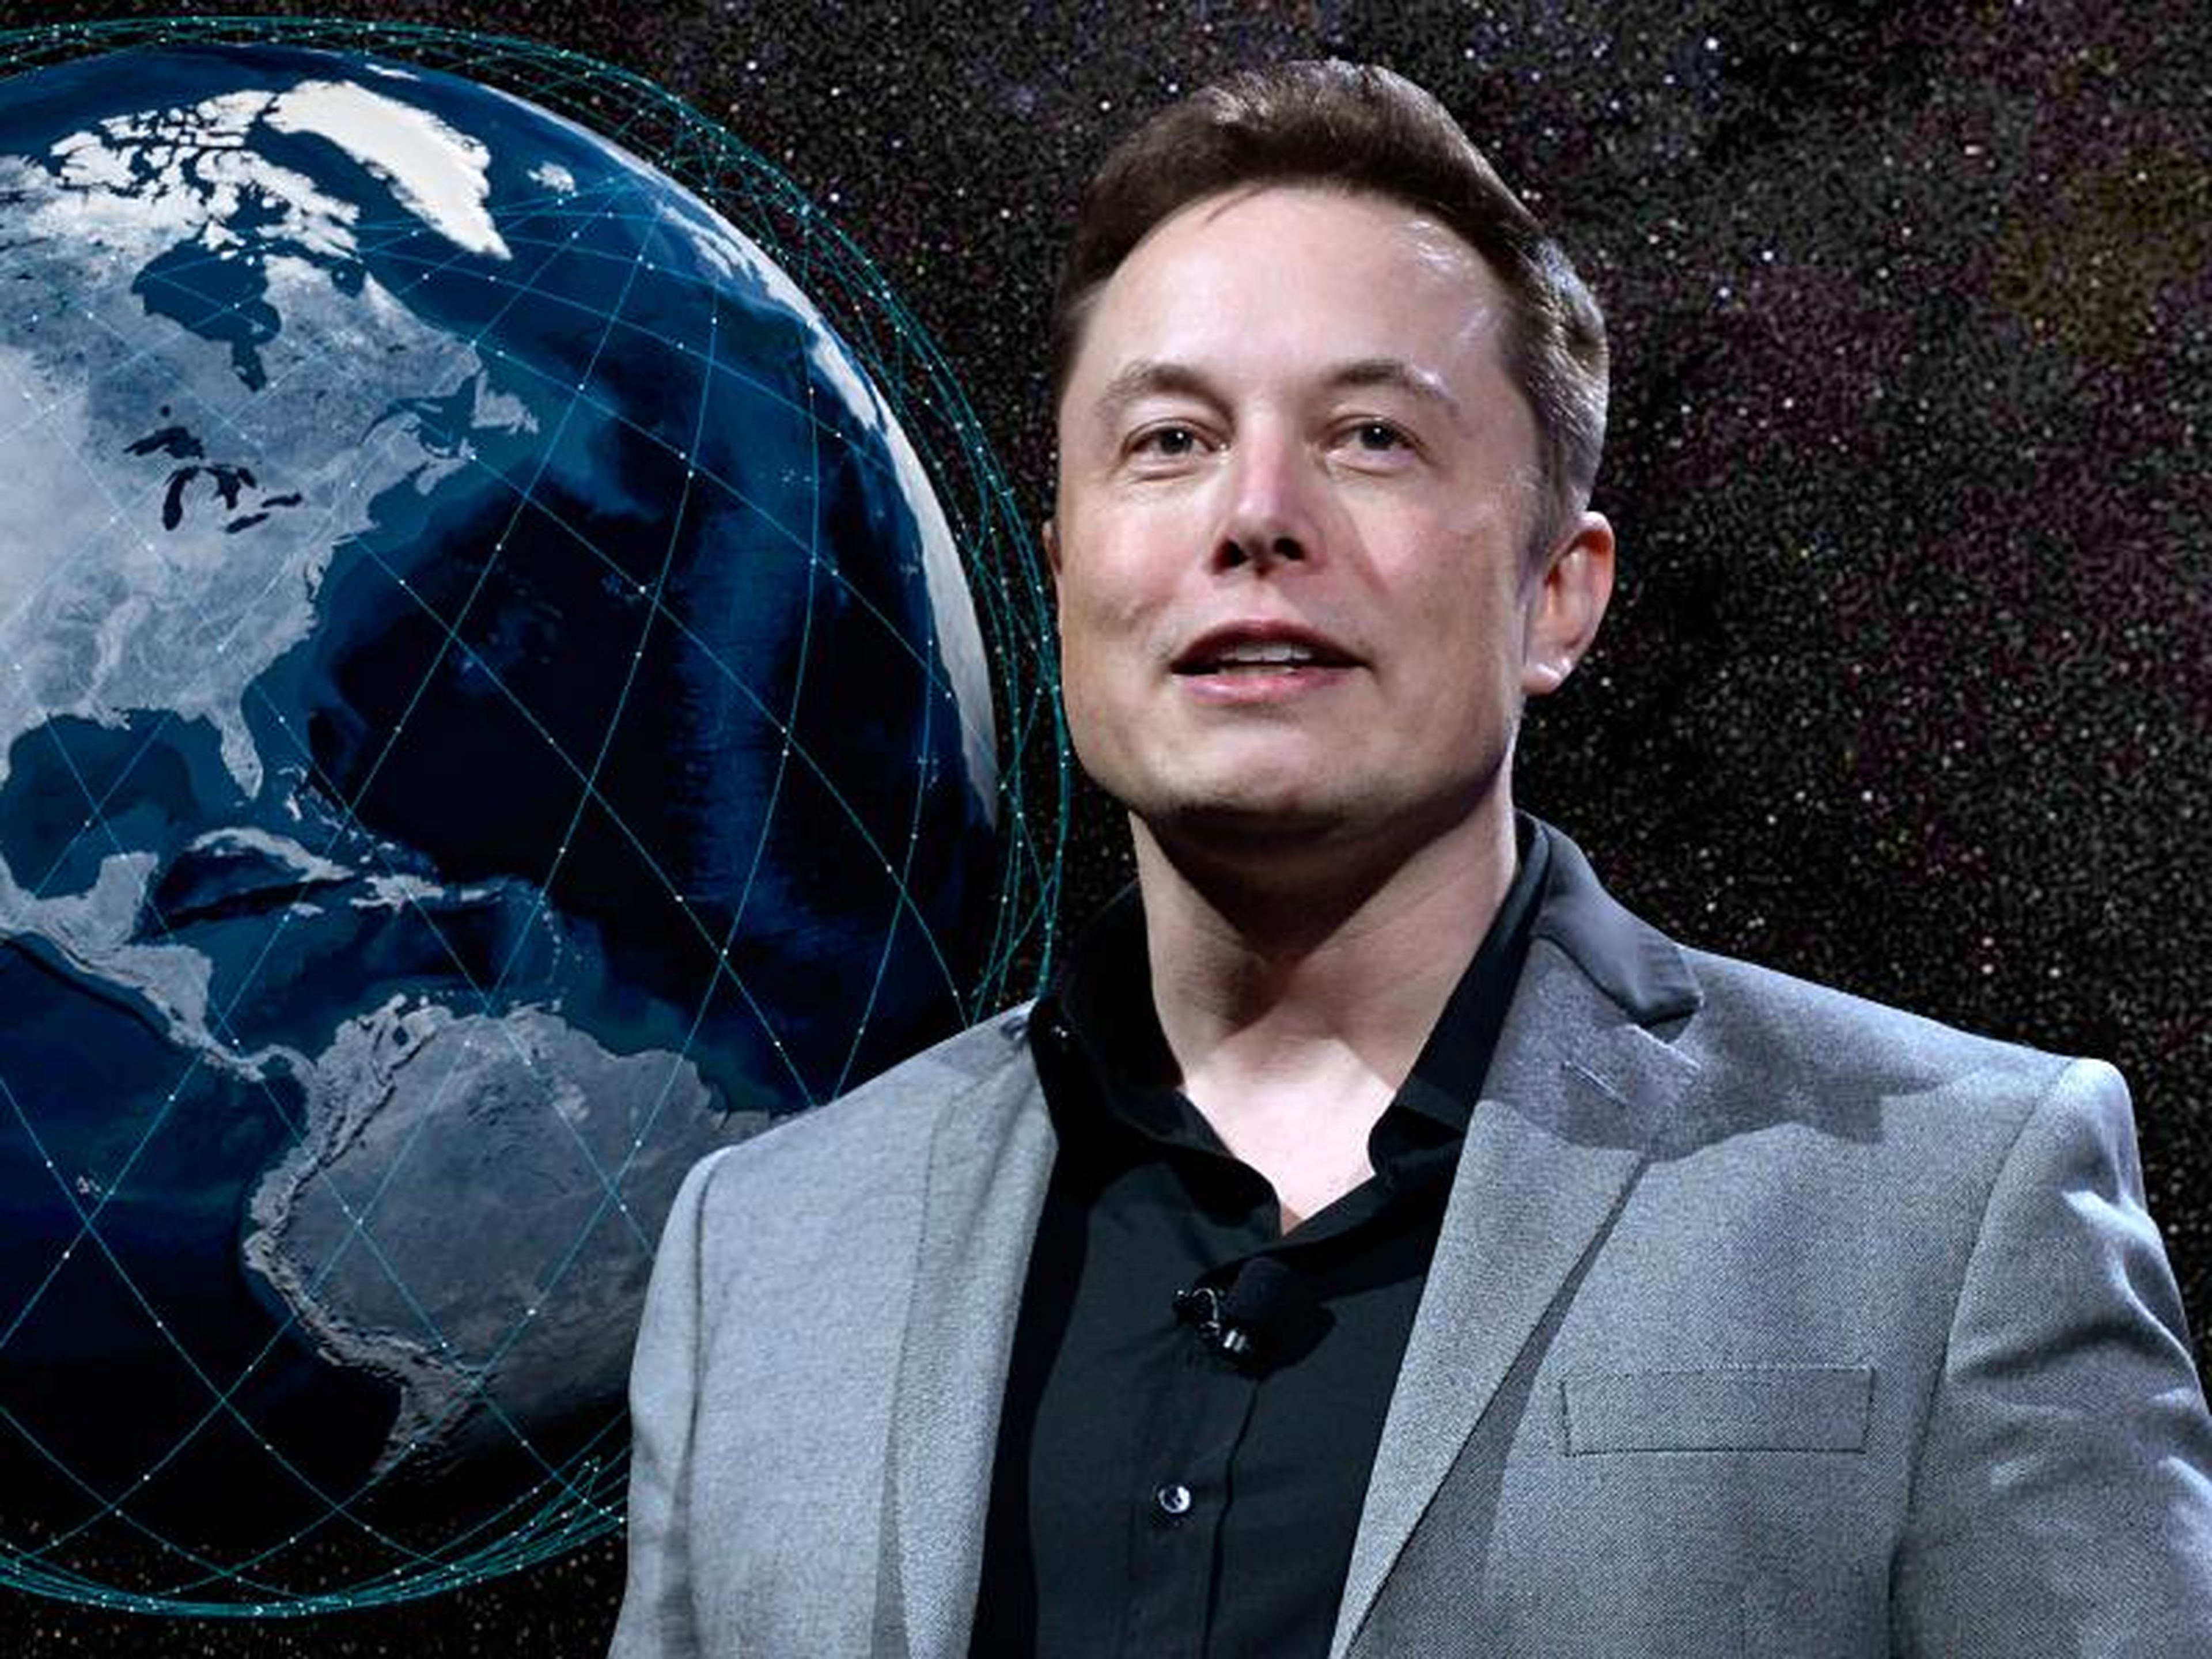 SpaceX, the rocket company founded by Elon Musk, plans to surround Earth with Starlink satellites and provide global high-speed, low-latency internet service from orbit.